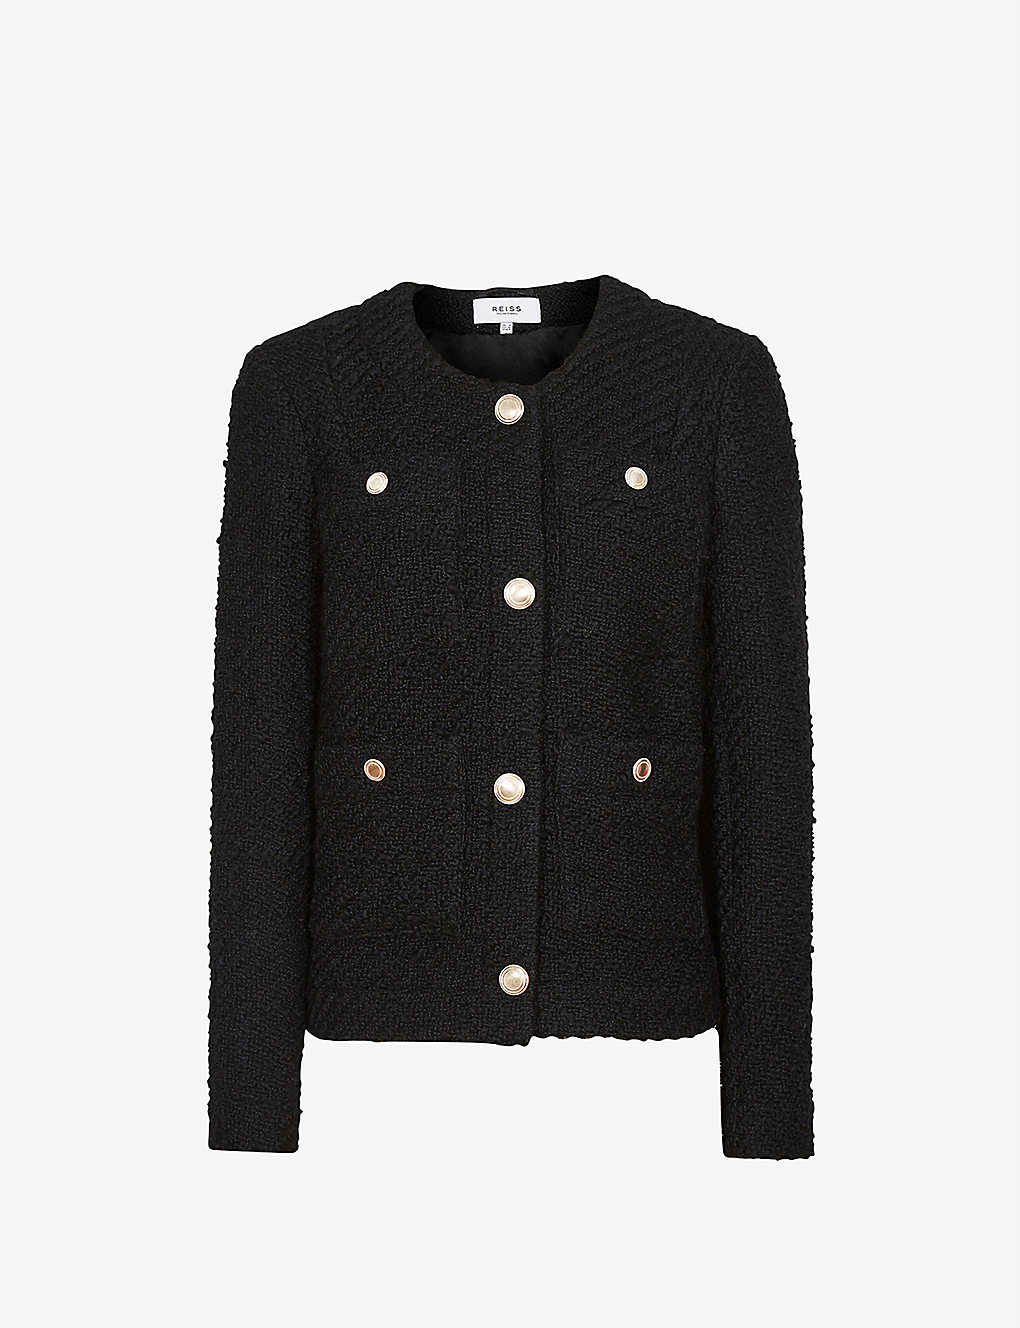 The Best Chanel Style Jackets on the Internet